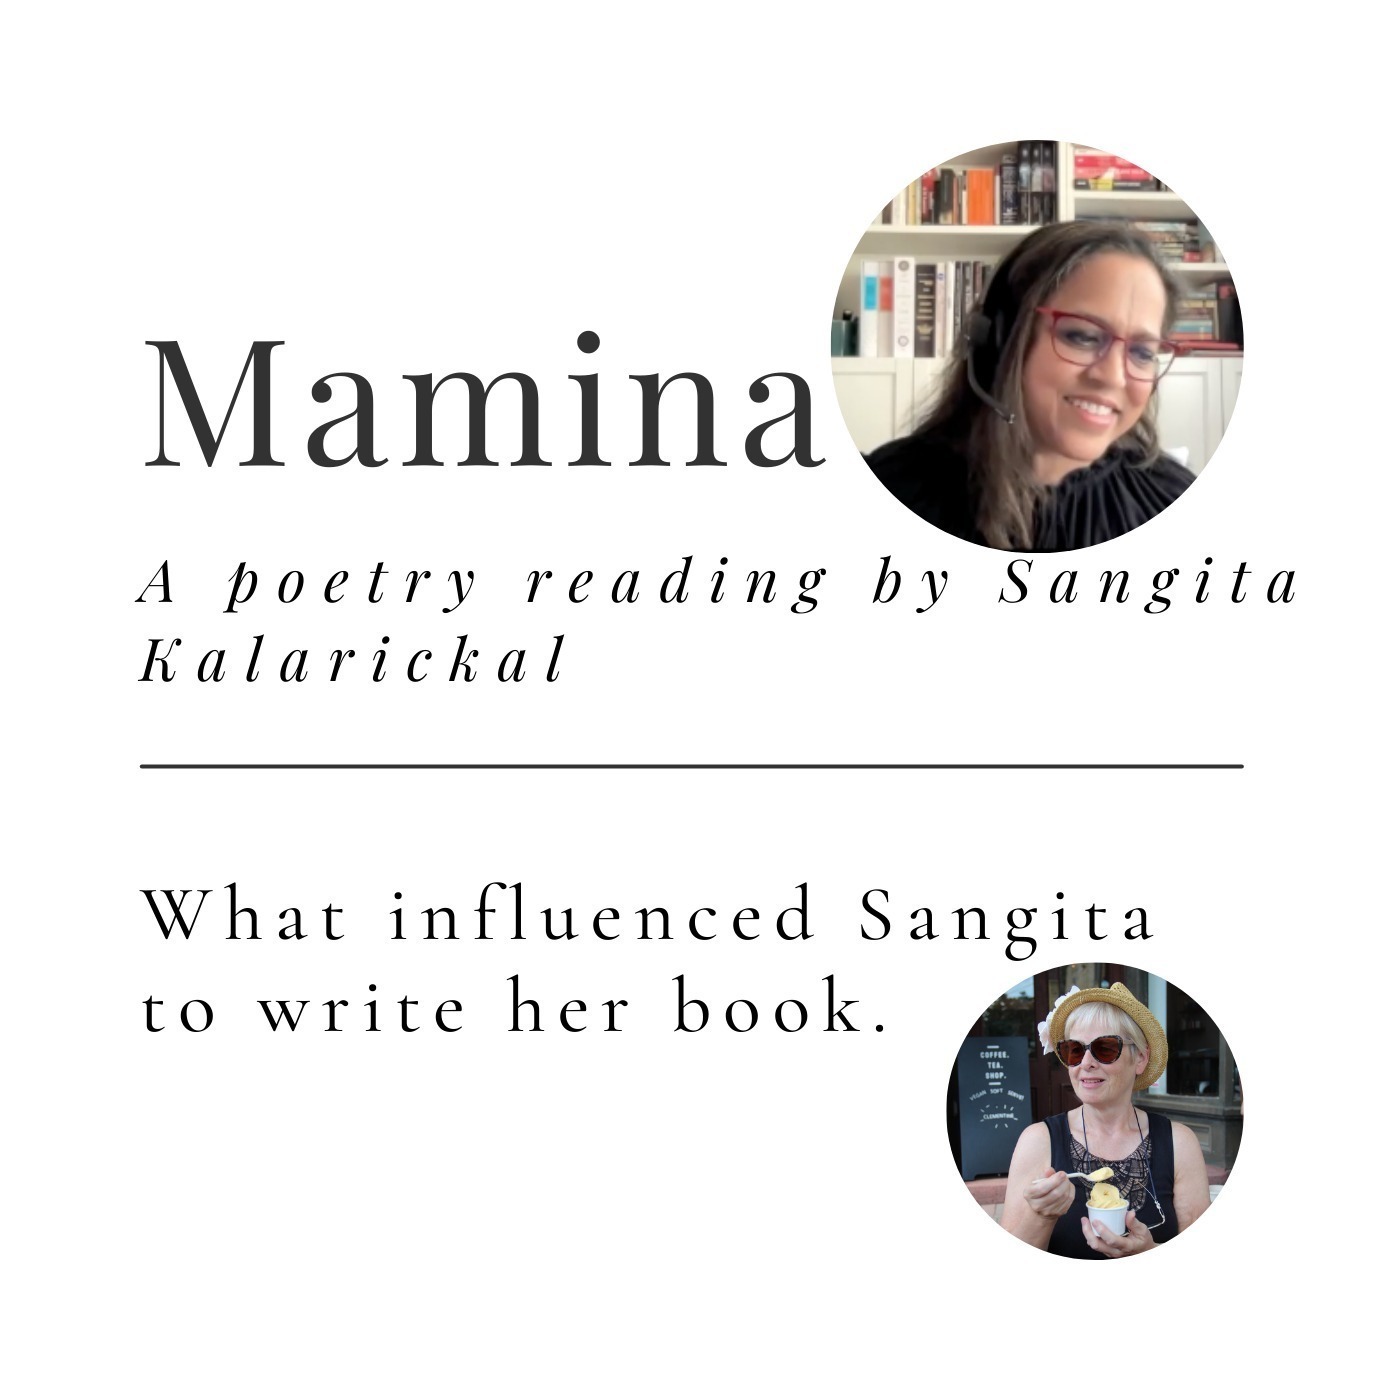 S7E7 Sangita Kalarickal reads from her Poetry Book Mamina and we discuss the influences on her work